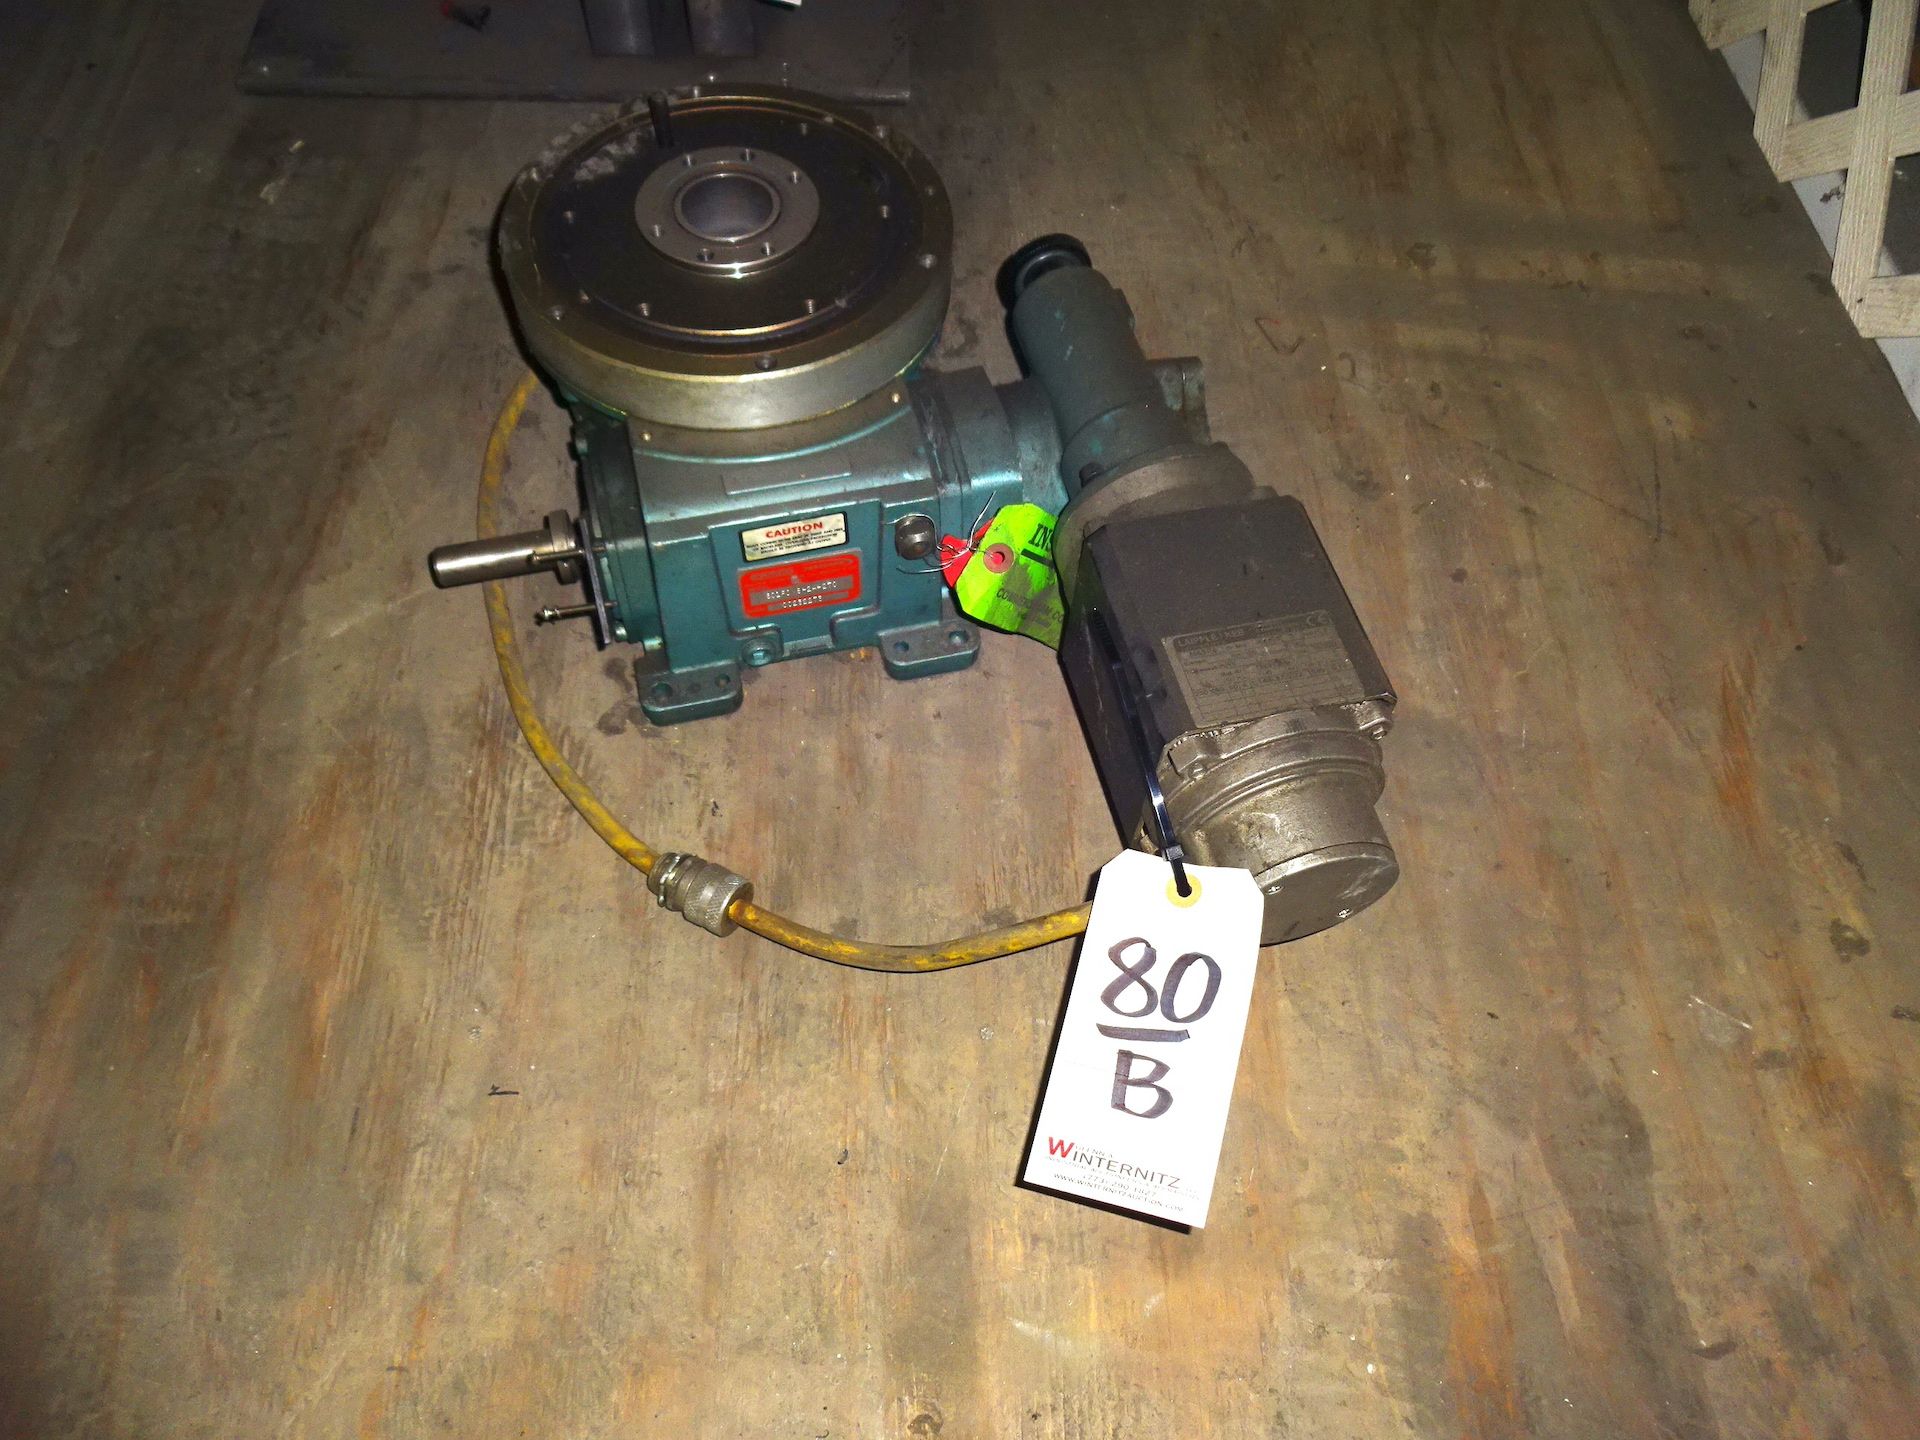 Camco Model 601RDM8H24-270 Rotary Drive Indexer - Image 2 of 2